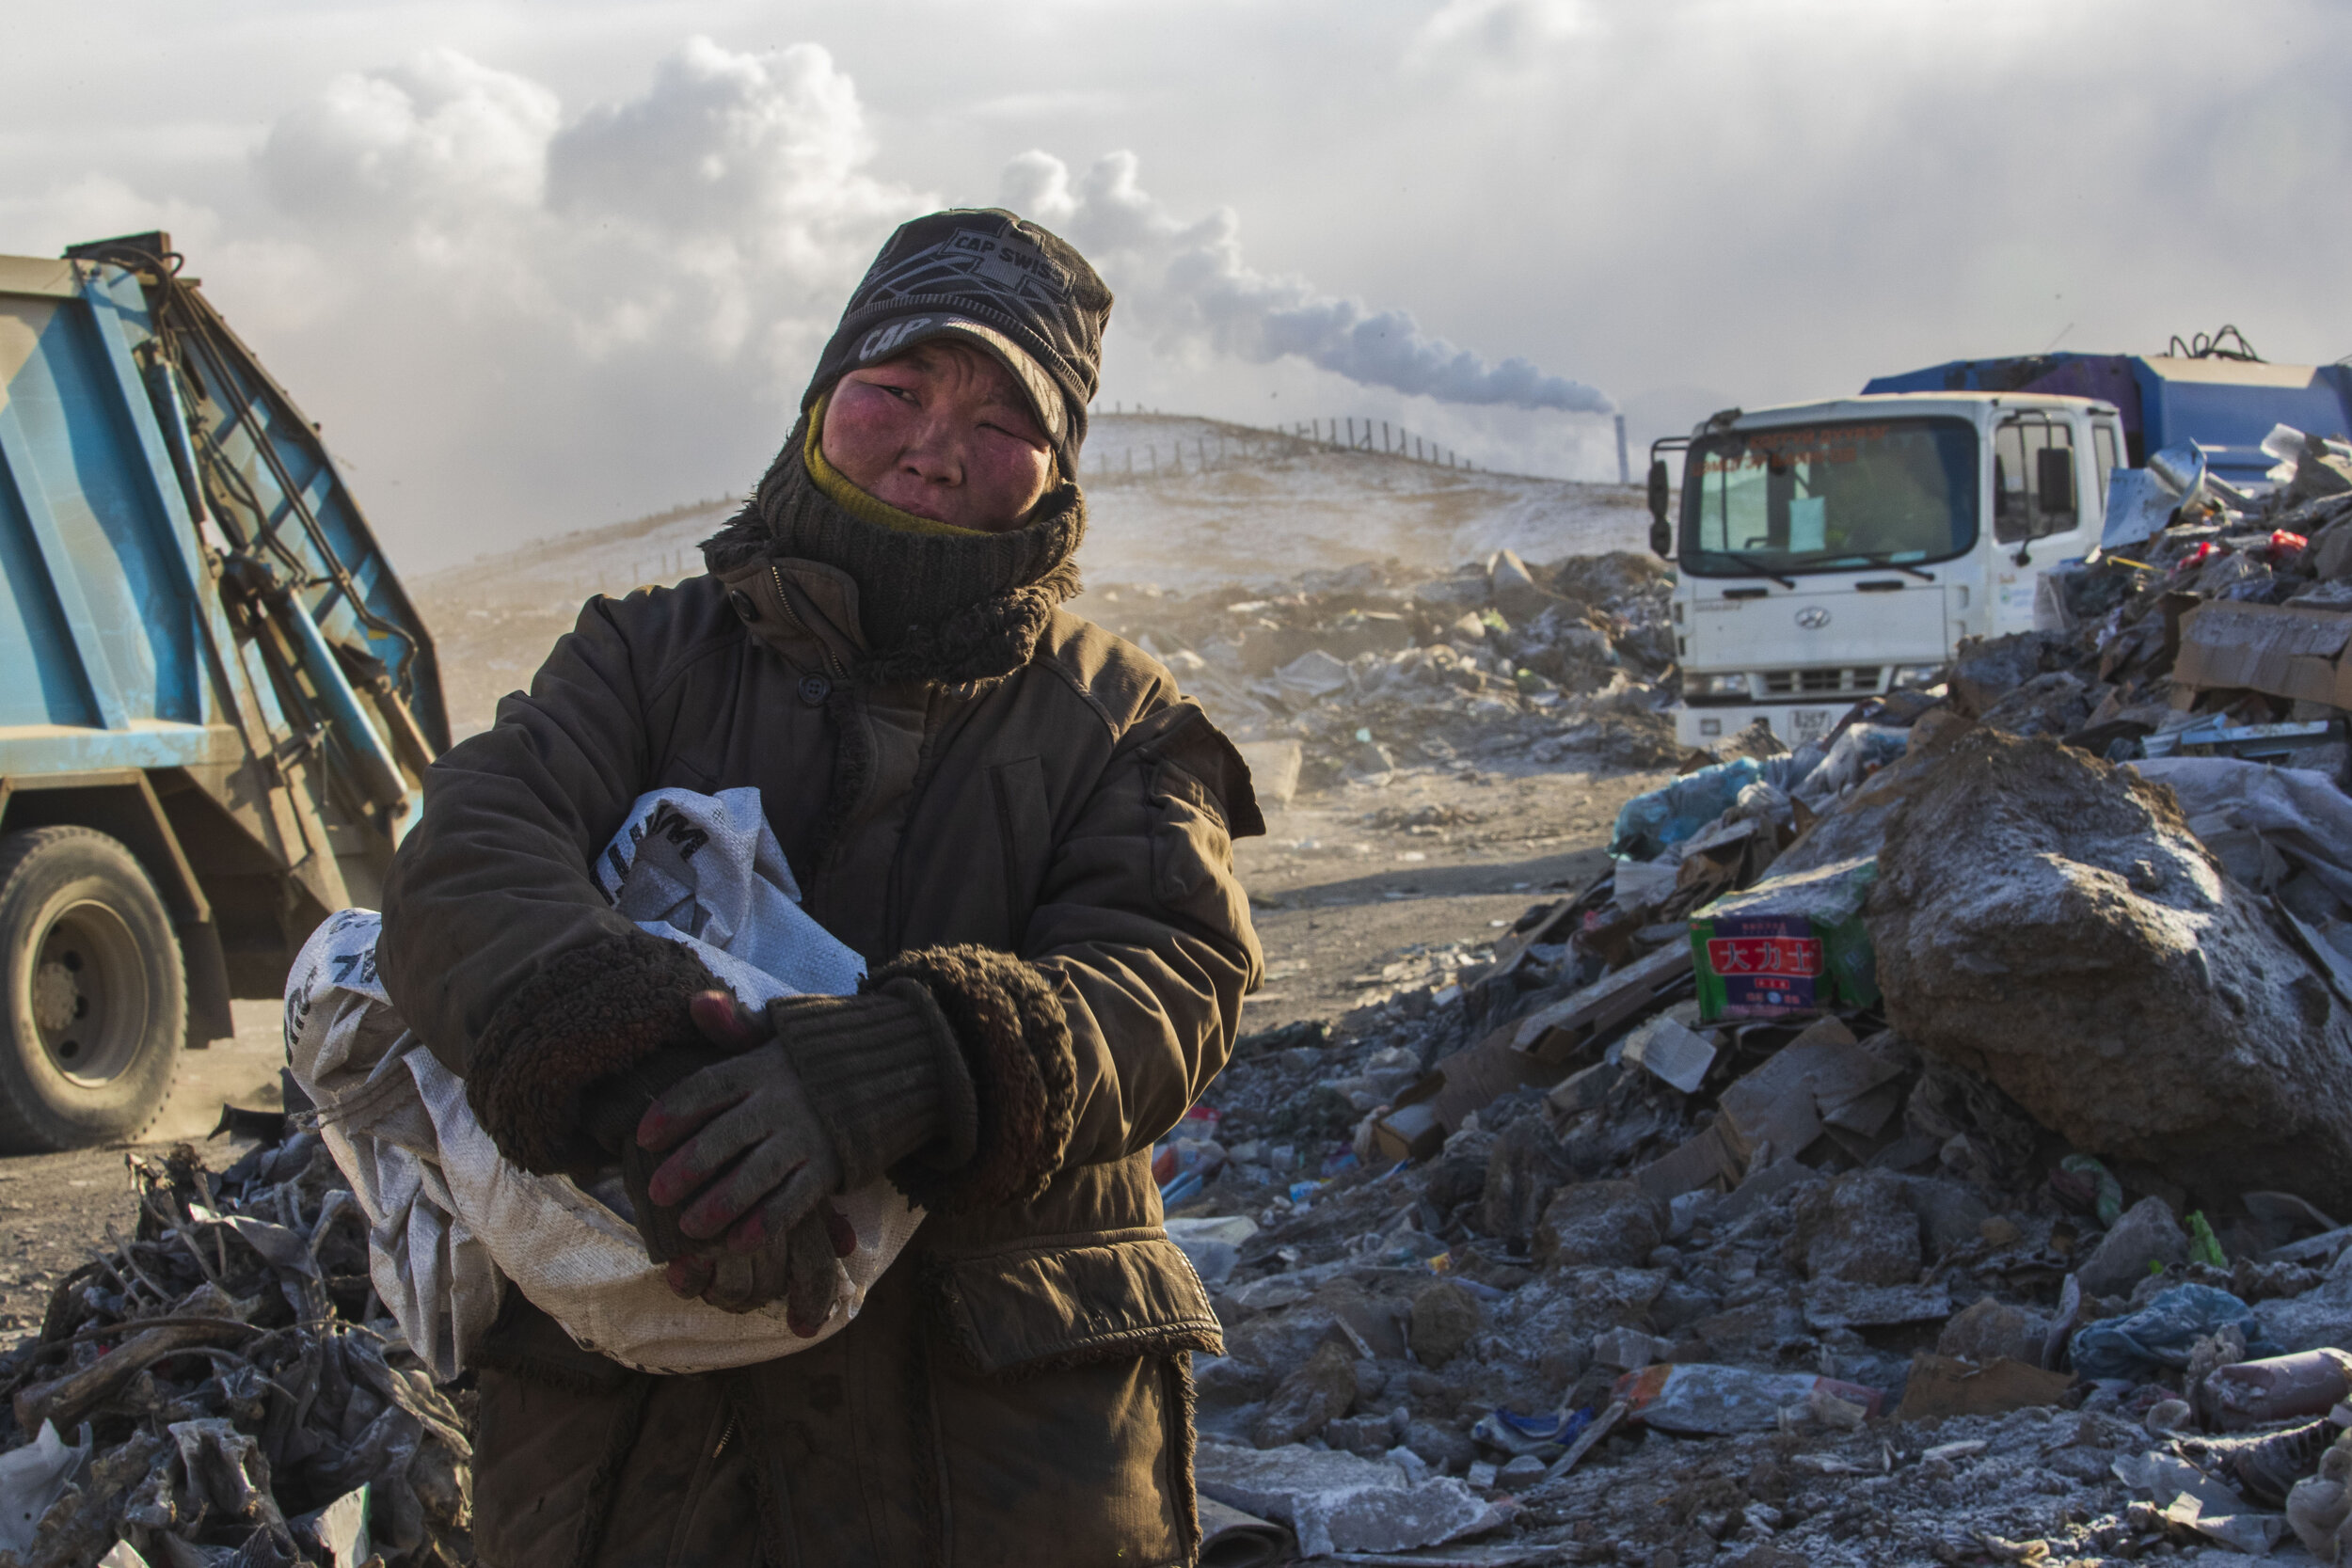  A garbage picker, who wished not to be named, poses for a portrait at an unnamed landfill on Friday, December 21, 2018, in Ulaanbaatar, Mongolia. "My regular income is normally 5,000 Turkig a day 10,000 on a good day.” (2500 is equal to 1 USD)," the